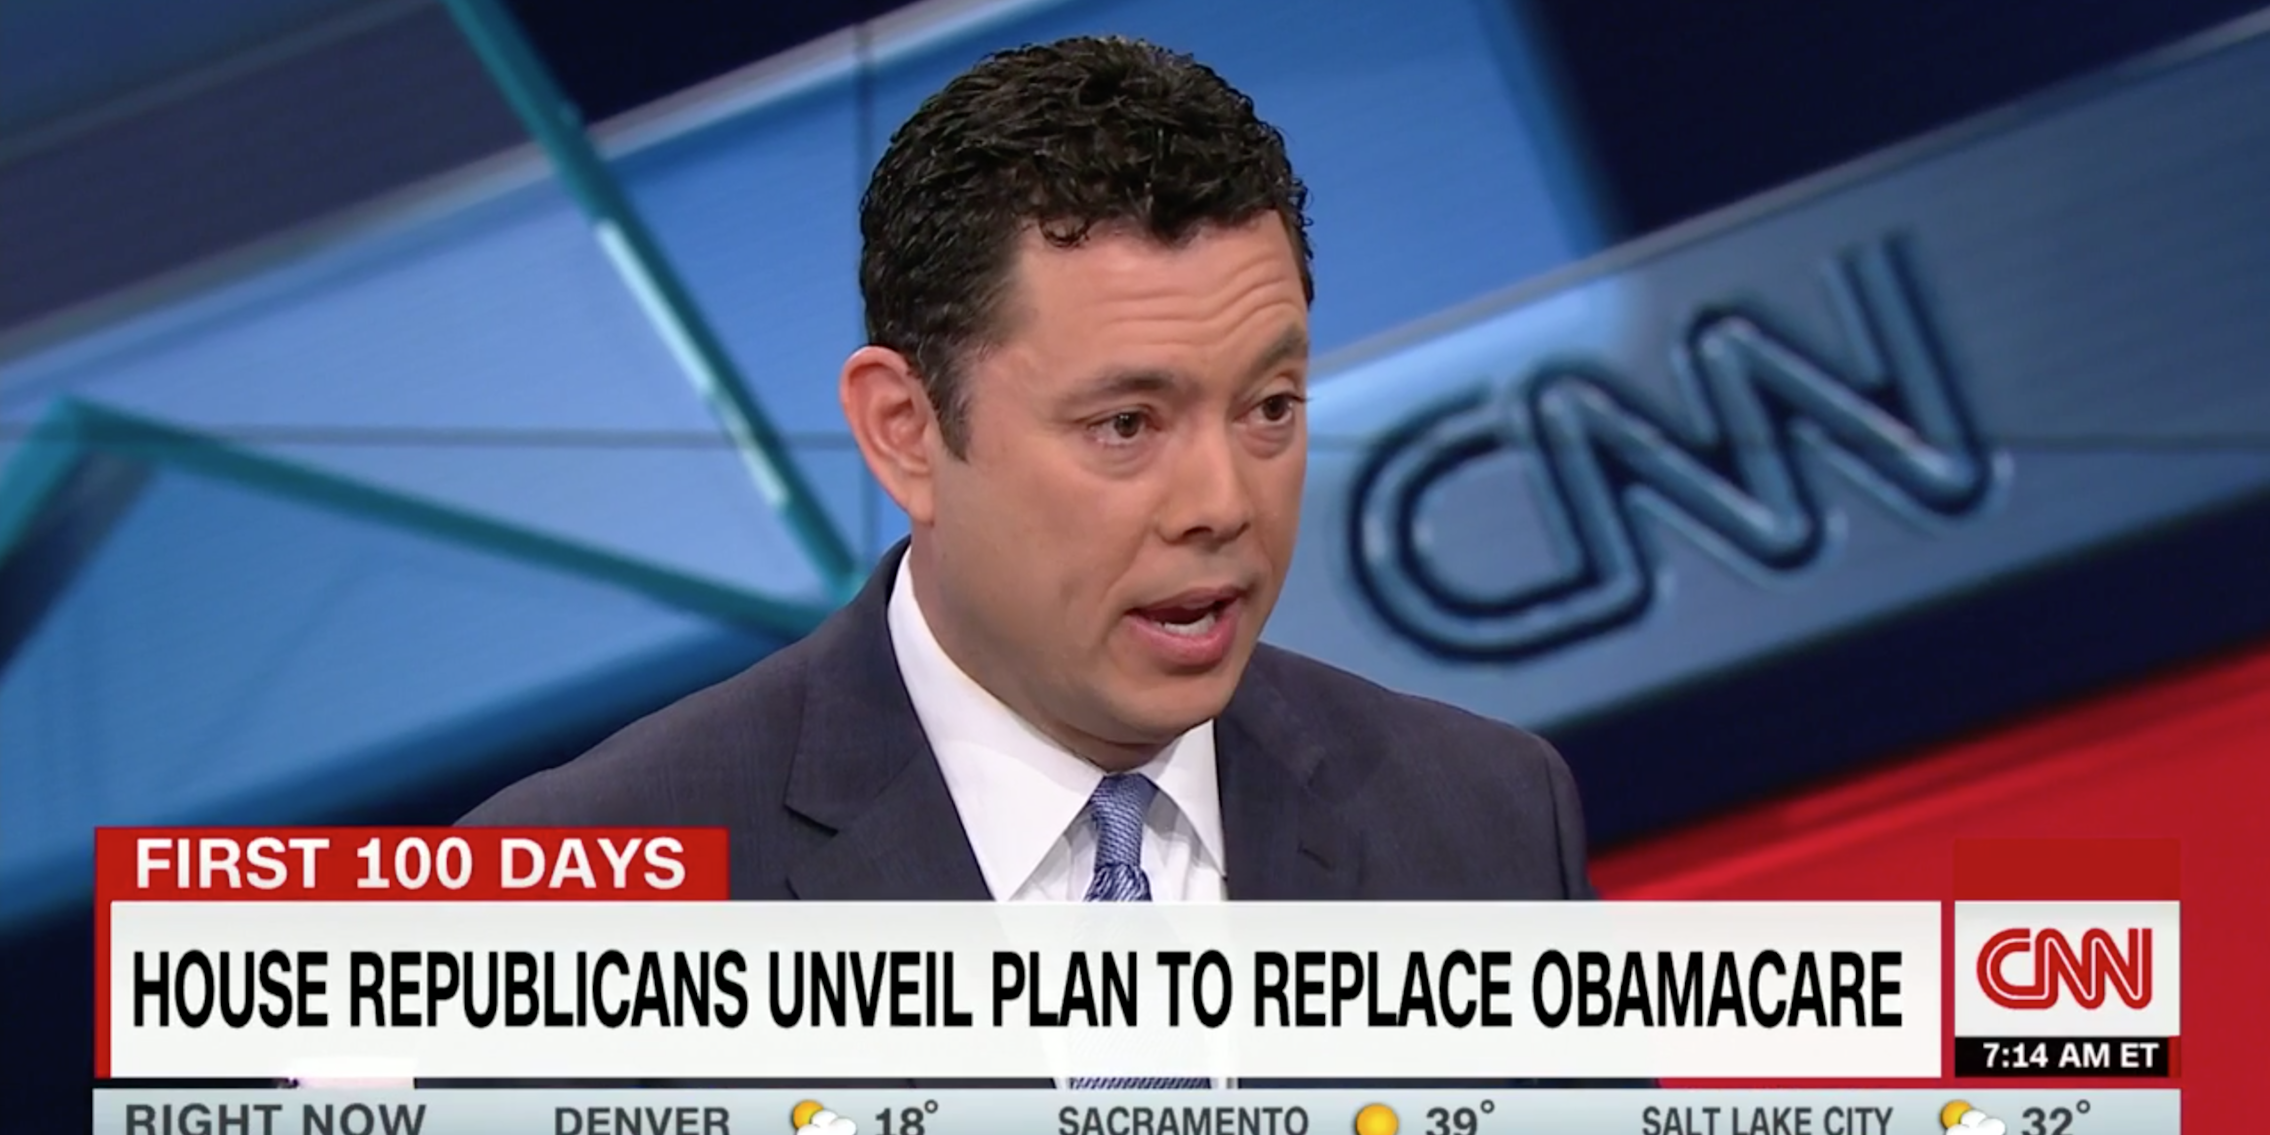 Jason Chaffetz on CNN discussing Obamacare replacement